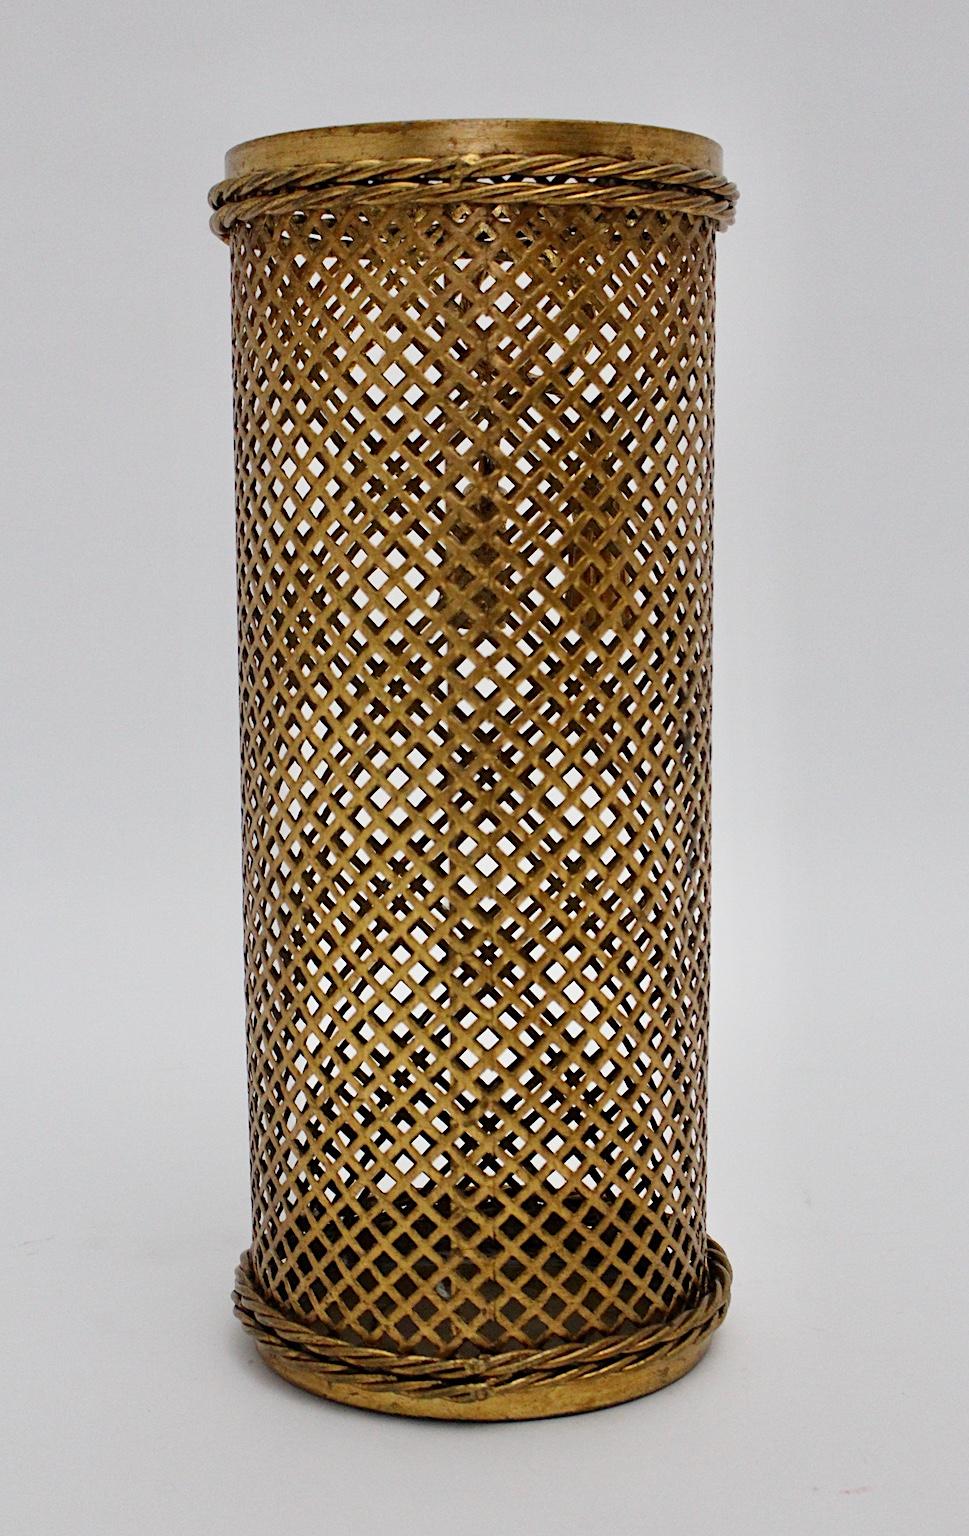 20th Century Hollywood Regency Style Gilded Umbrella Stand by Li Puma Firenze, 1950s, Italy For Sale